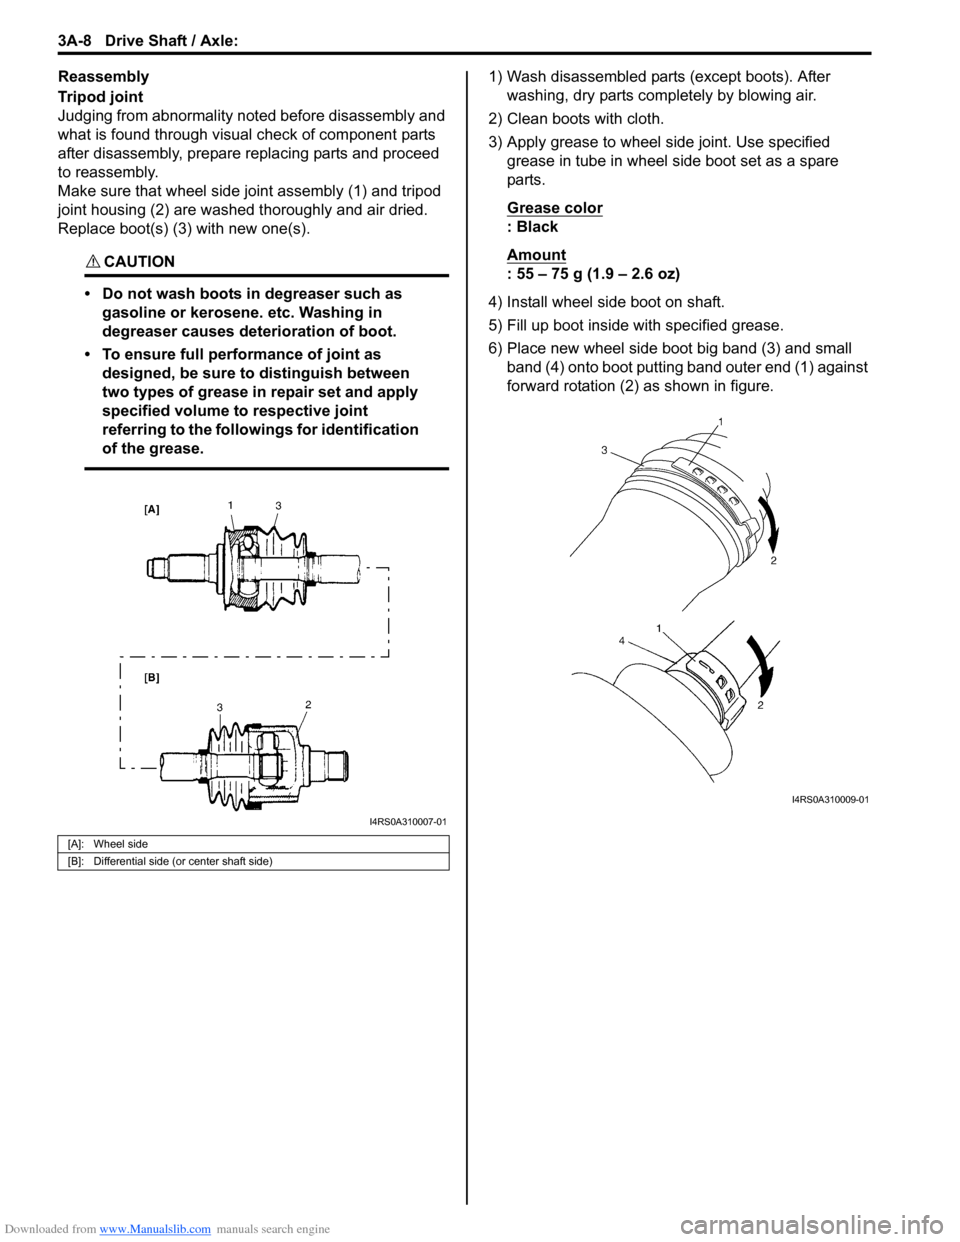 SUZUKI SWIFT 2006 2.G Service Repair Manual Downloaded from www.Manualslib.com manuals search engine 3A-8 Drive Shaft / Axle: 
Reassembly
Tripod joint
Judging from abnormality noted before disassembly and 
what is found through visual check of 